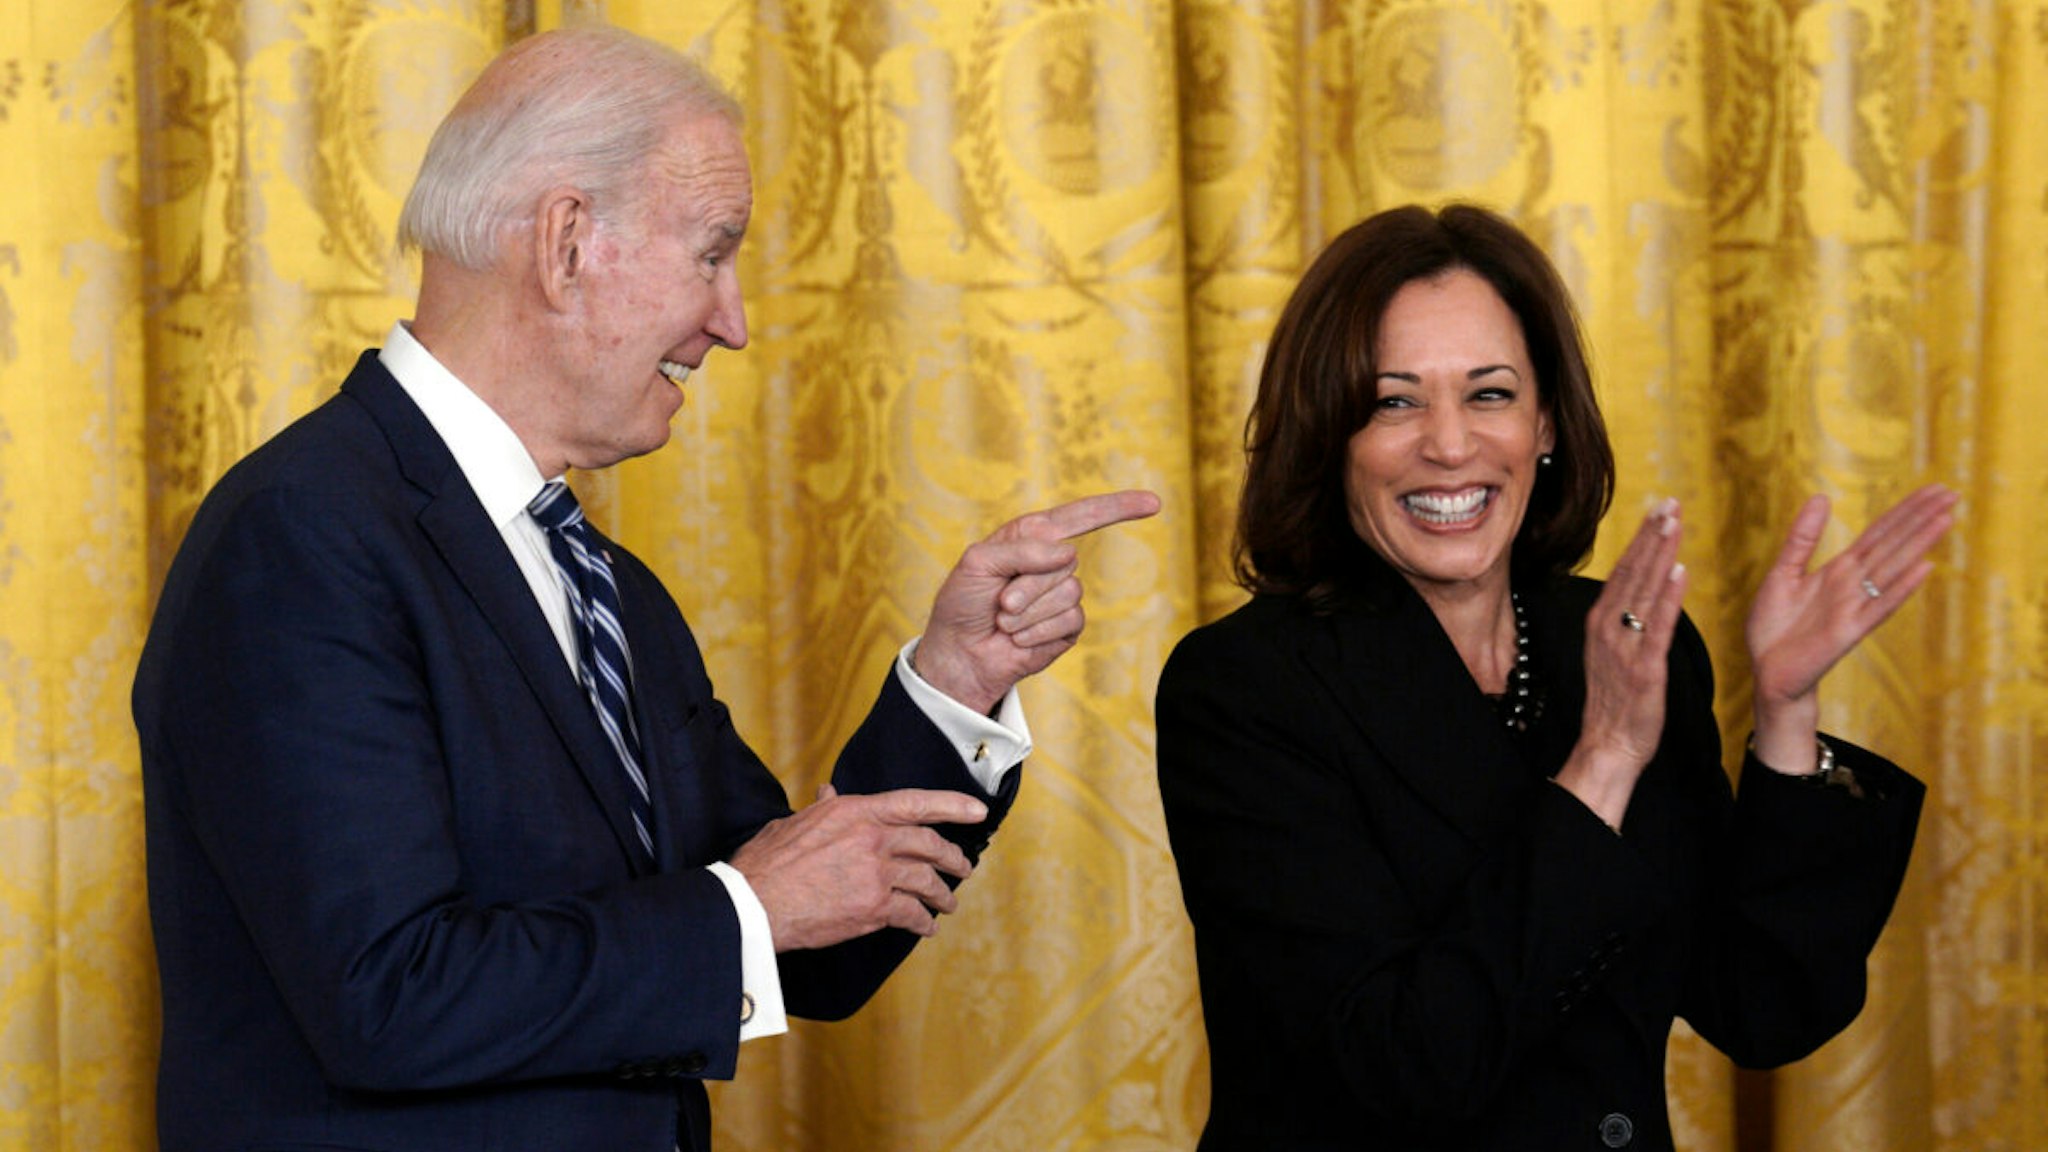 US President Joe Biden, left, and Vice President Kamala Harris during a reception celebrating Black History Month in the East Room of the White House in Washington, DC, US, on Monday, Feb. 27, 2023.